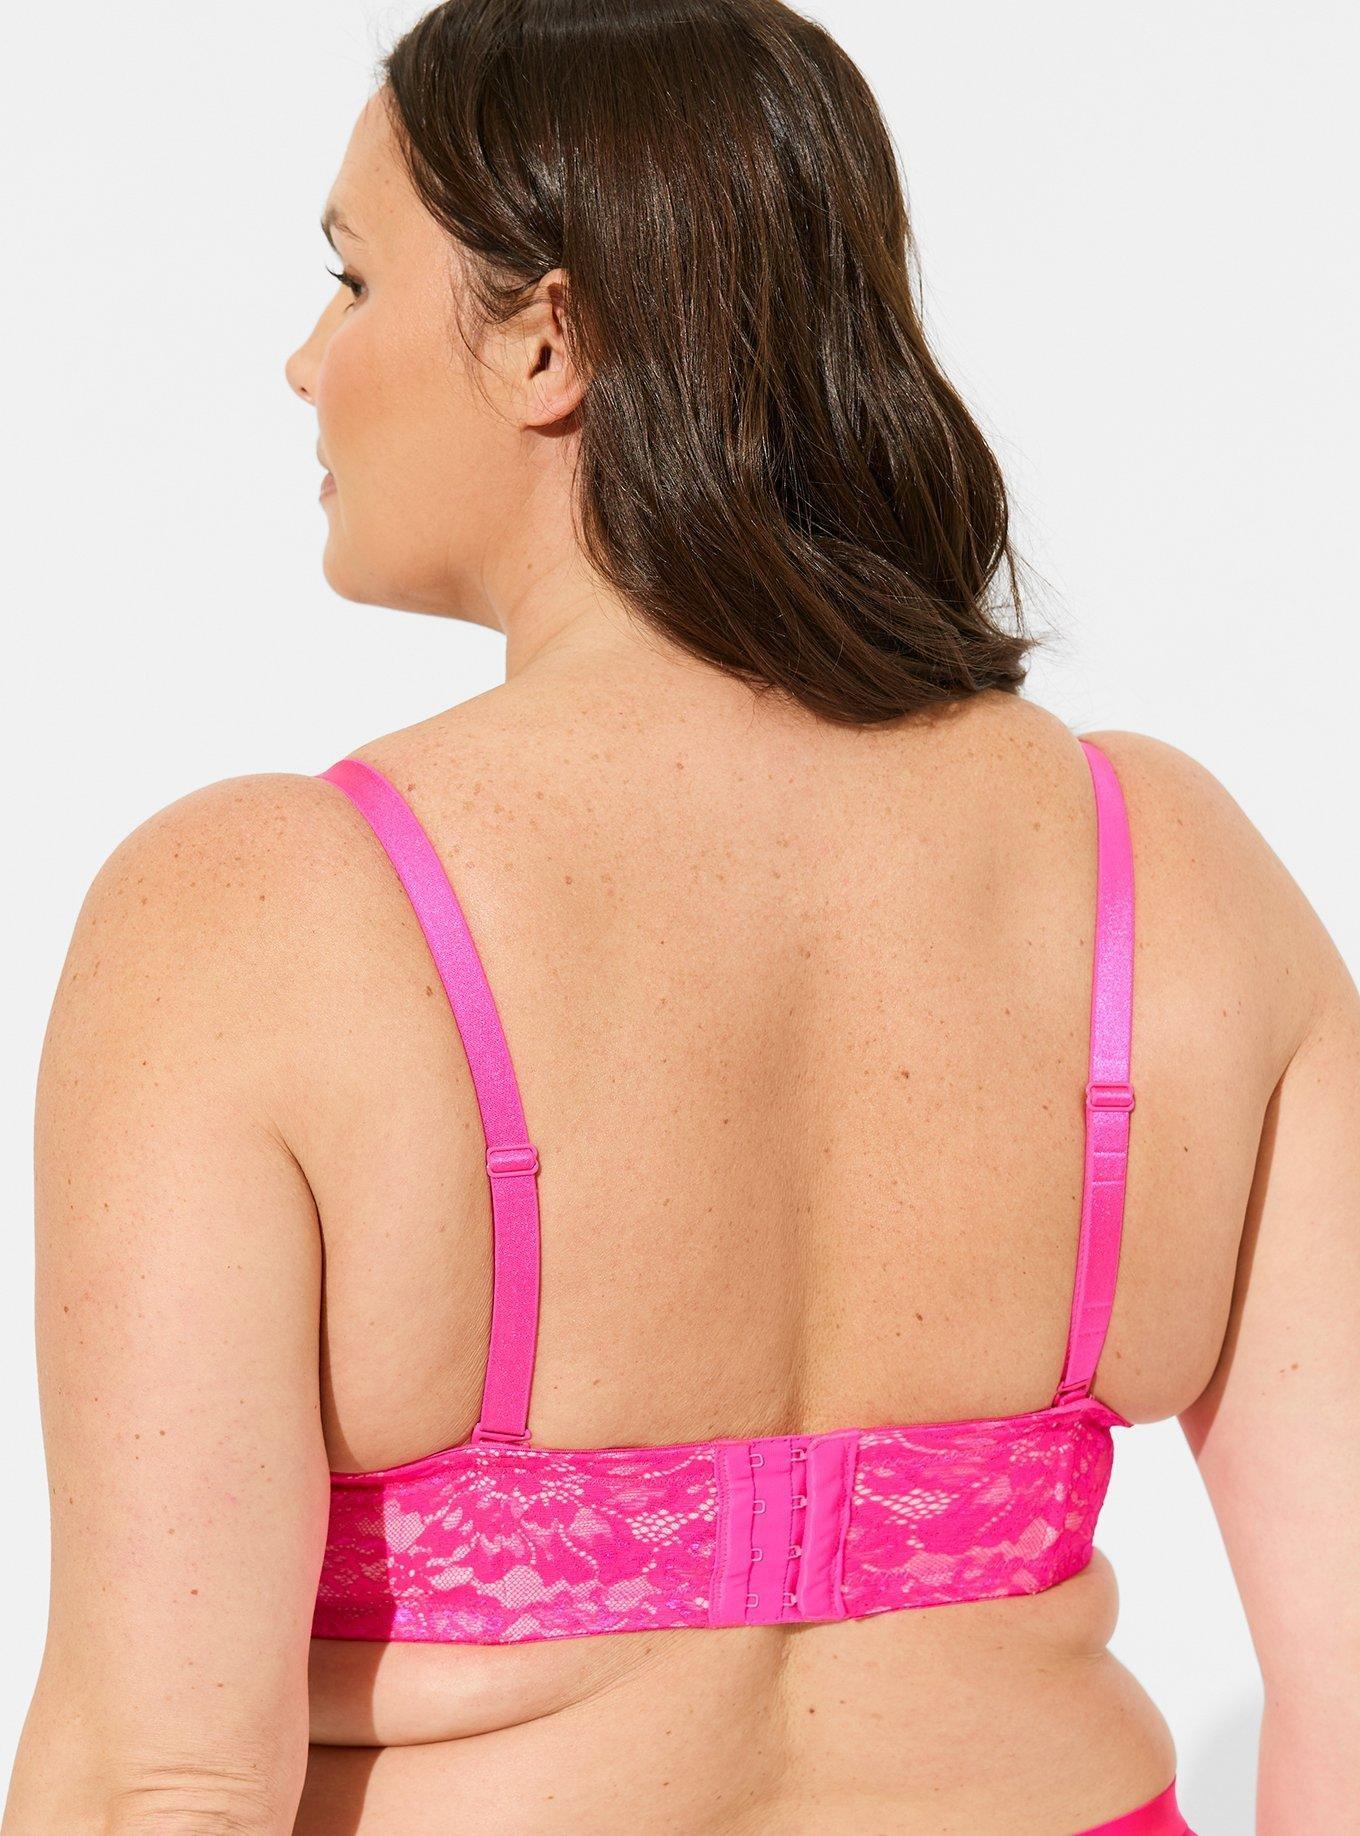 Plus Size Pink Lingerie, Everyday Low Prices